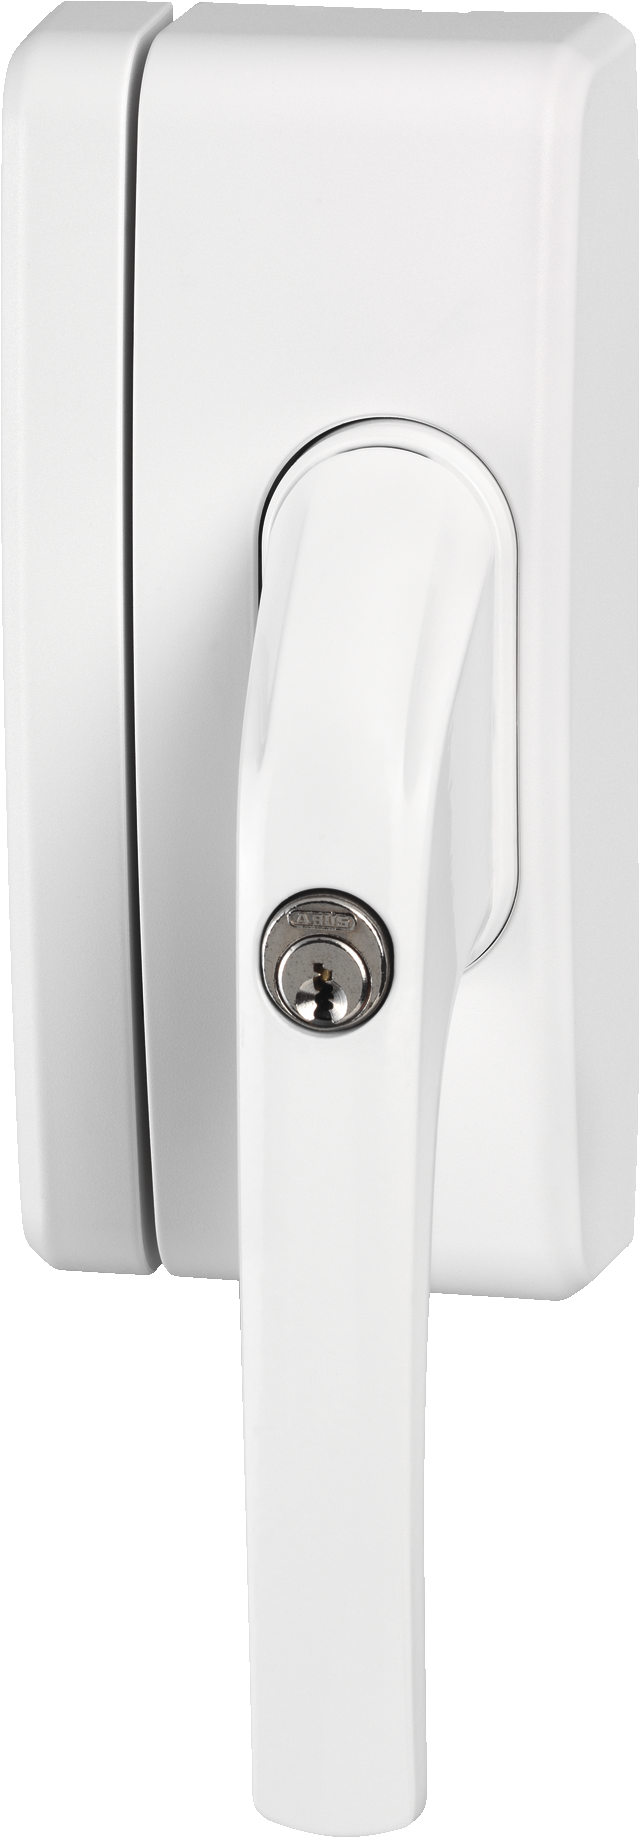 security window handle FO400A white oblique front view